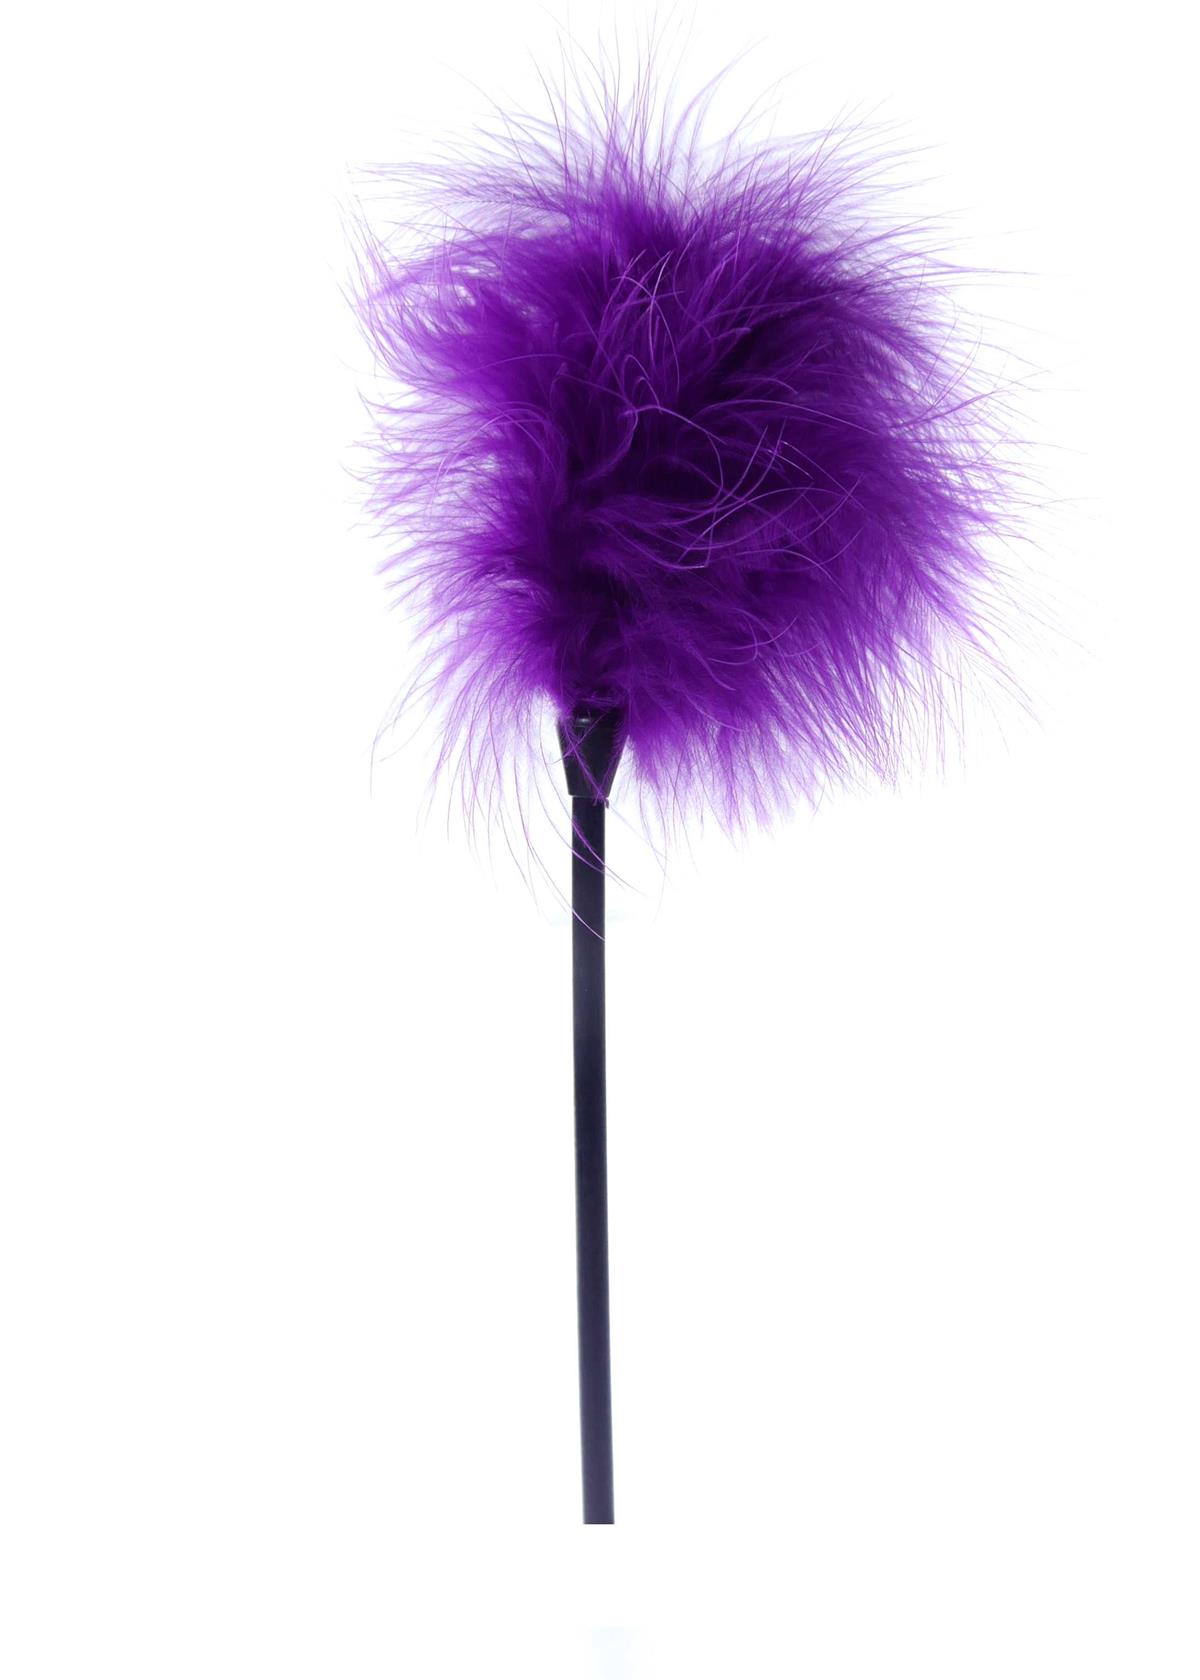 Bossoftoys - 61-00030 - Feather Tickler - Fetish Power - Purple - Colour Packing